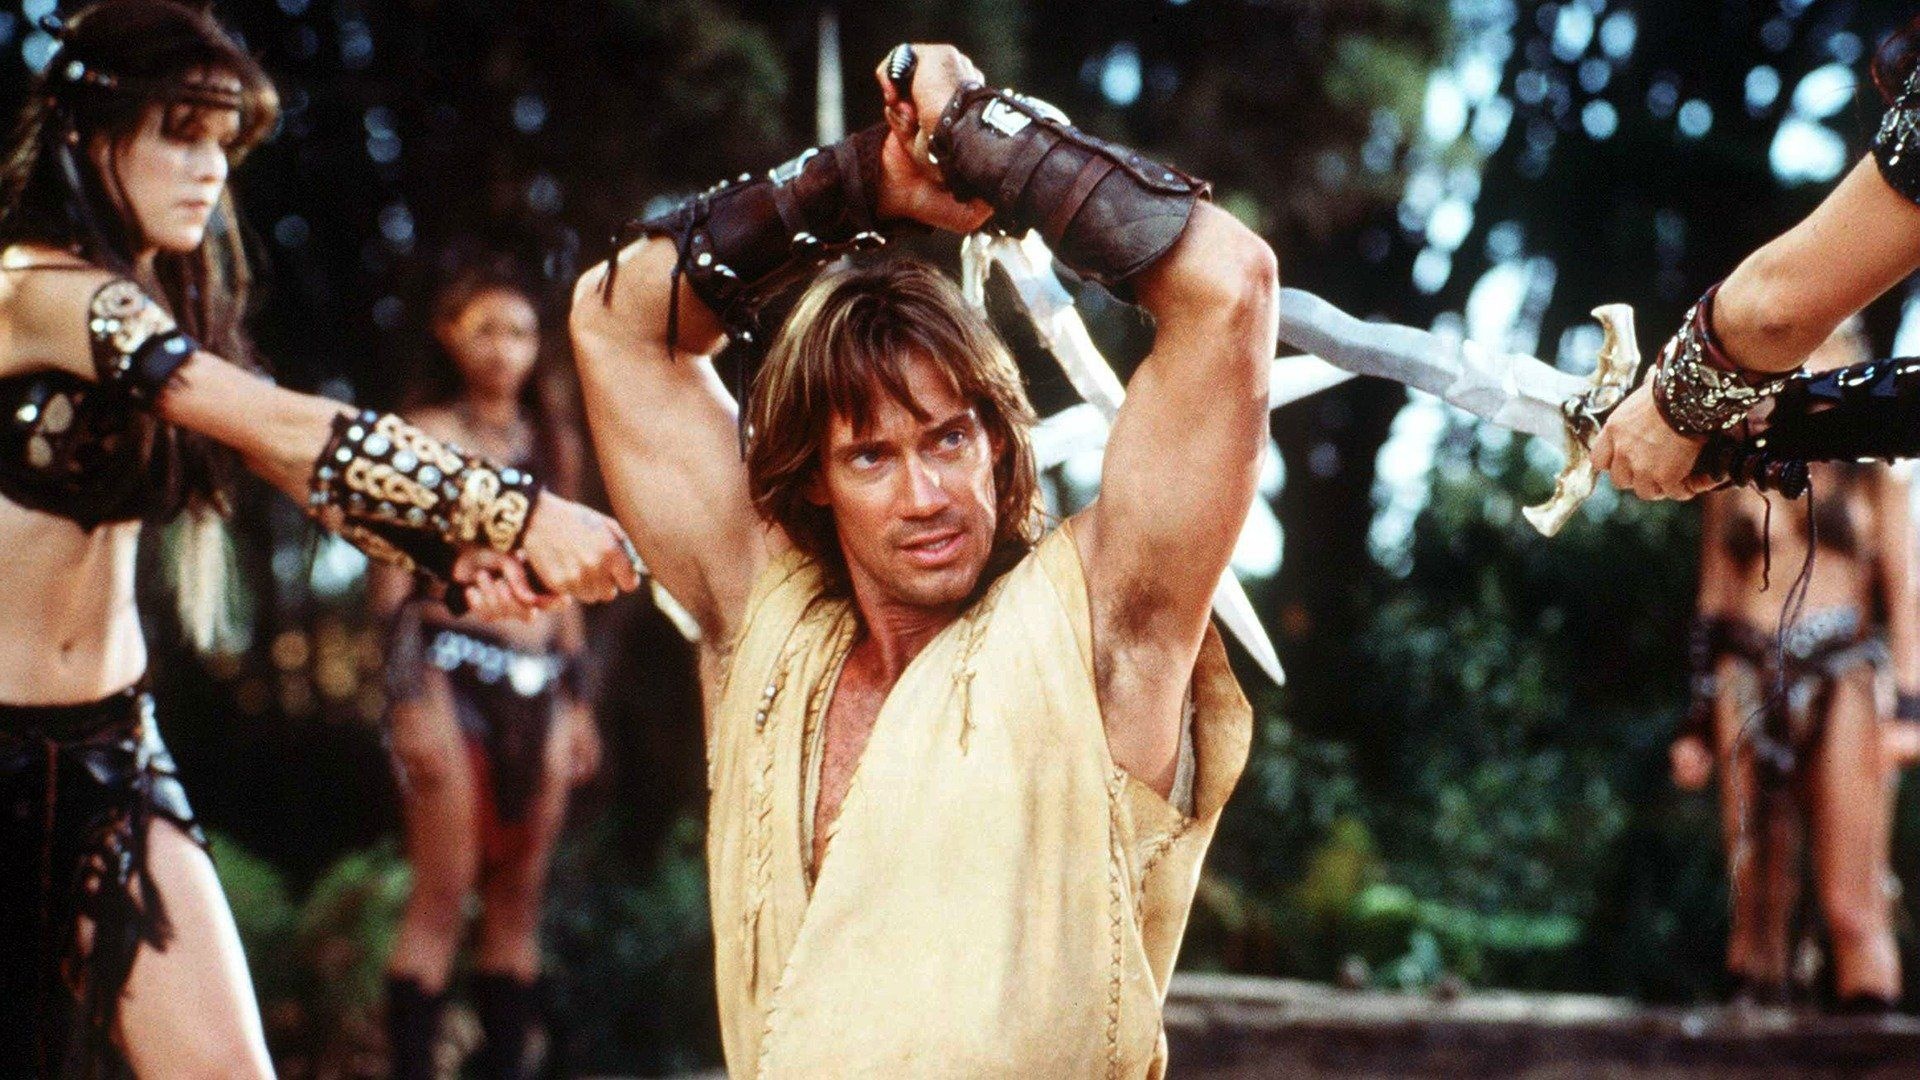 Kevin Sorbo: Hercules, Greek myths and legends, Horde of barbarians, Sword stunt fencing, Season 2, Episode 4, Brian Thompson. 1920x1080 Full HD Background.